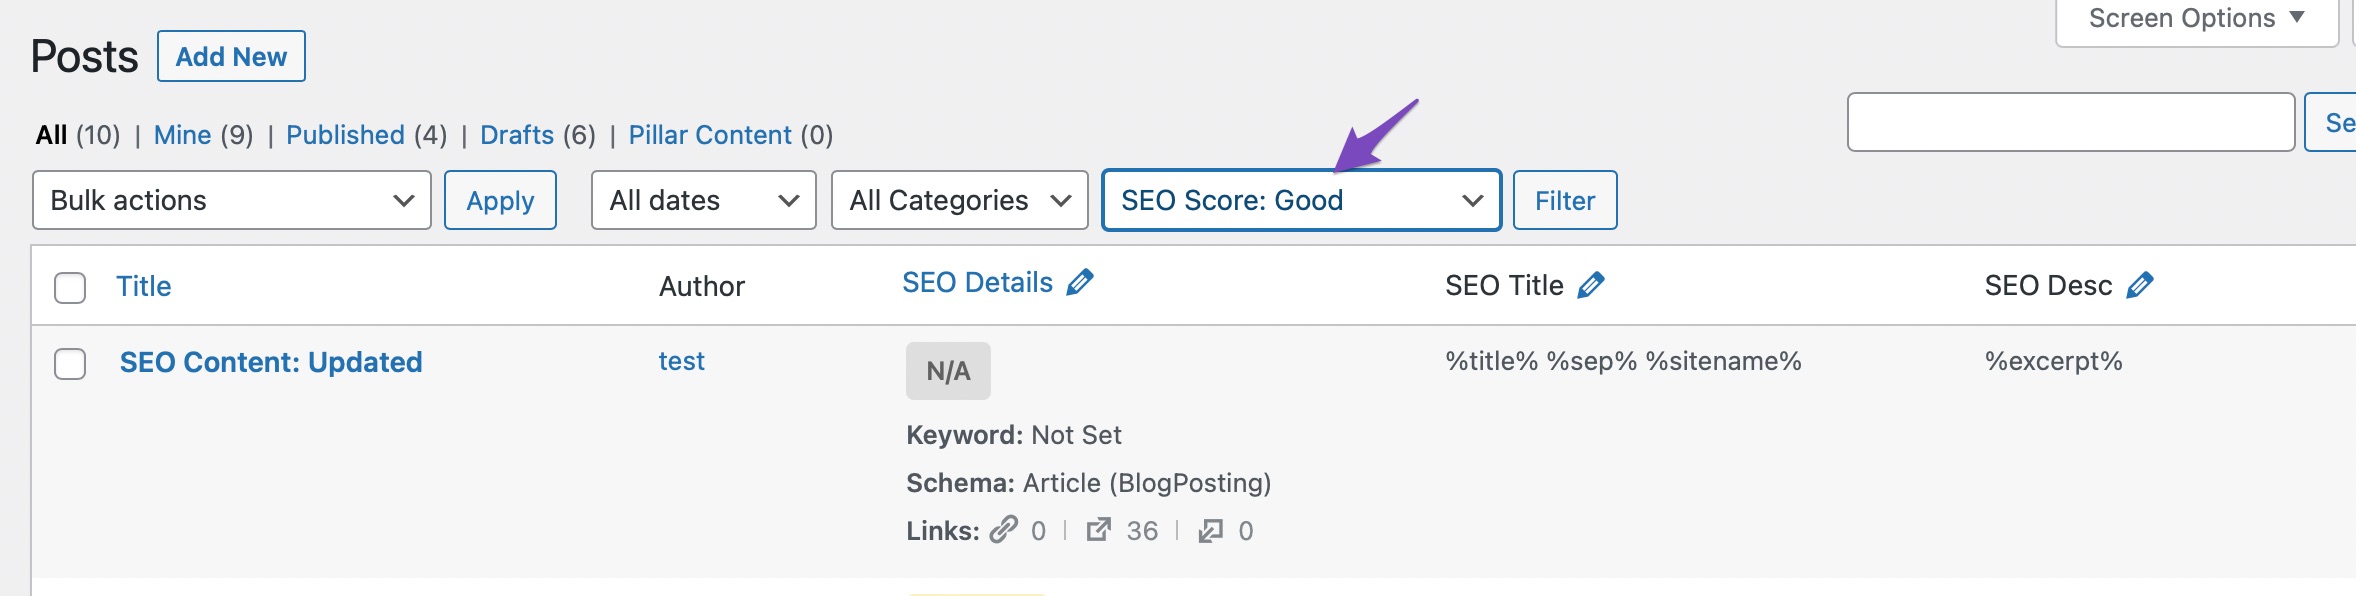 Filter posts by Good SEO Score